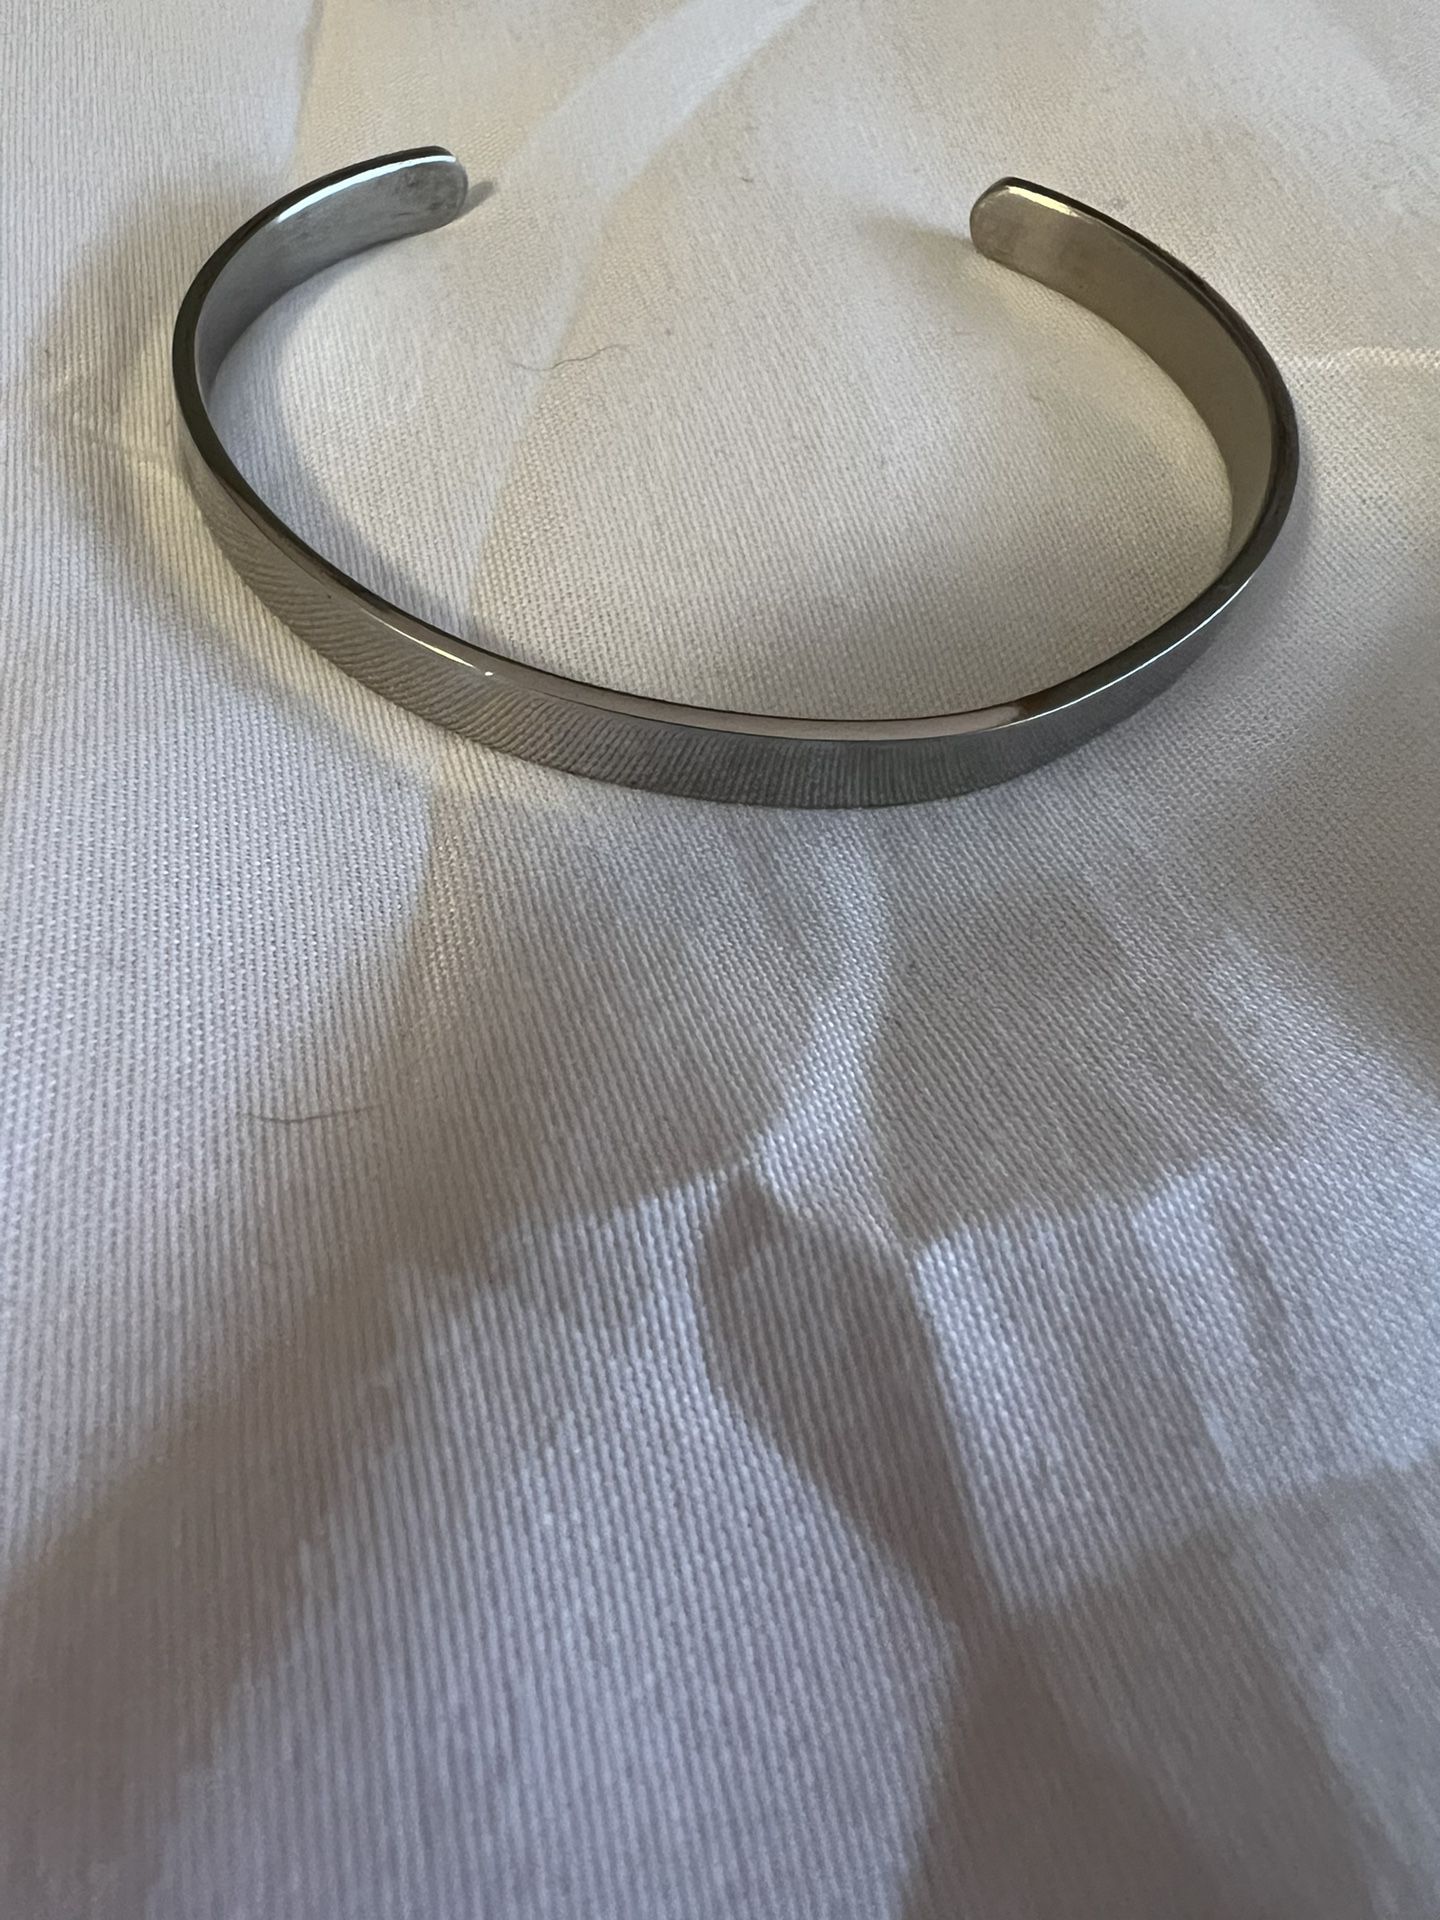 Silver Bracelet - Engraved With A Phrase